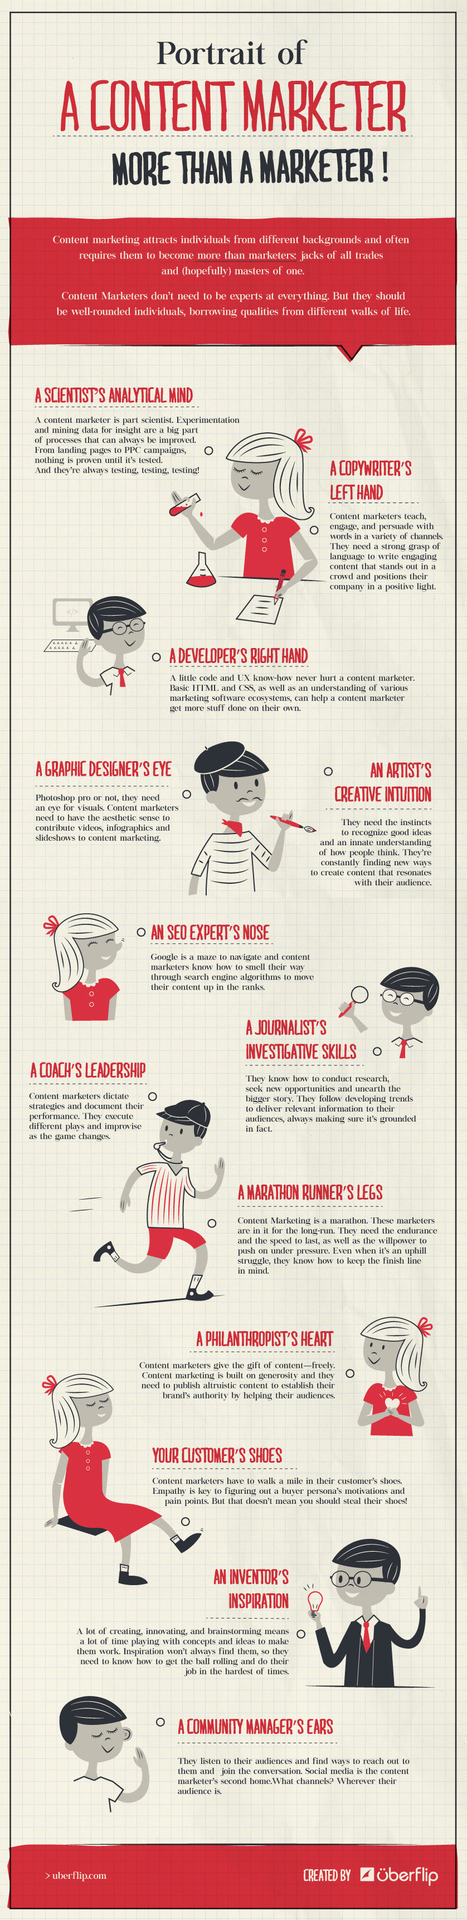 #Infographic: Portrait of a Content Marketer: More Than a Writer | Design, Science and Technology | Scoop.it